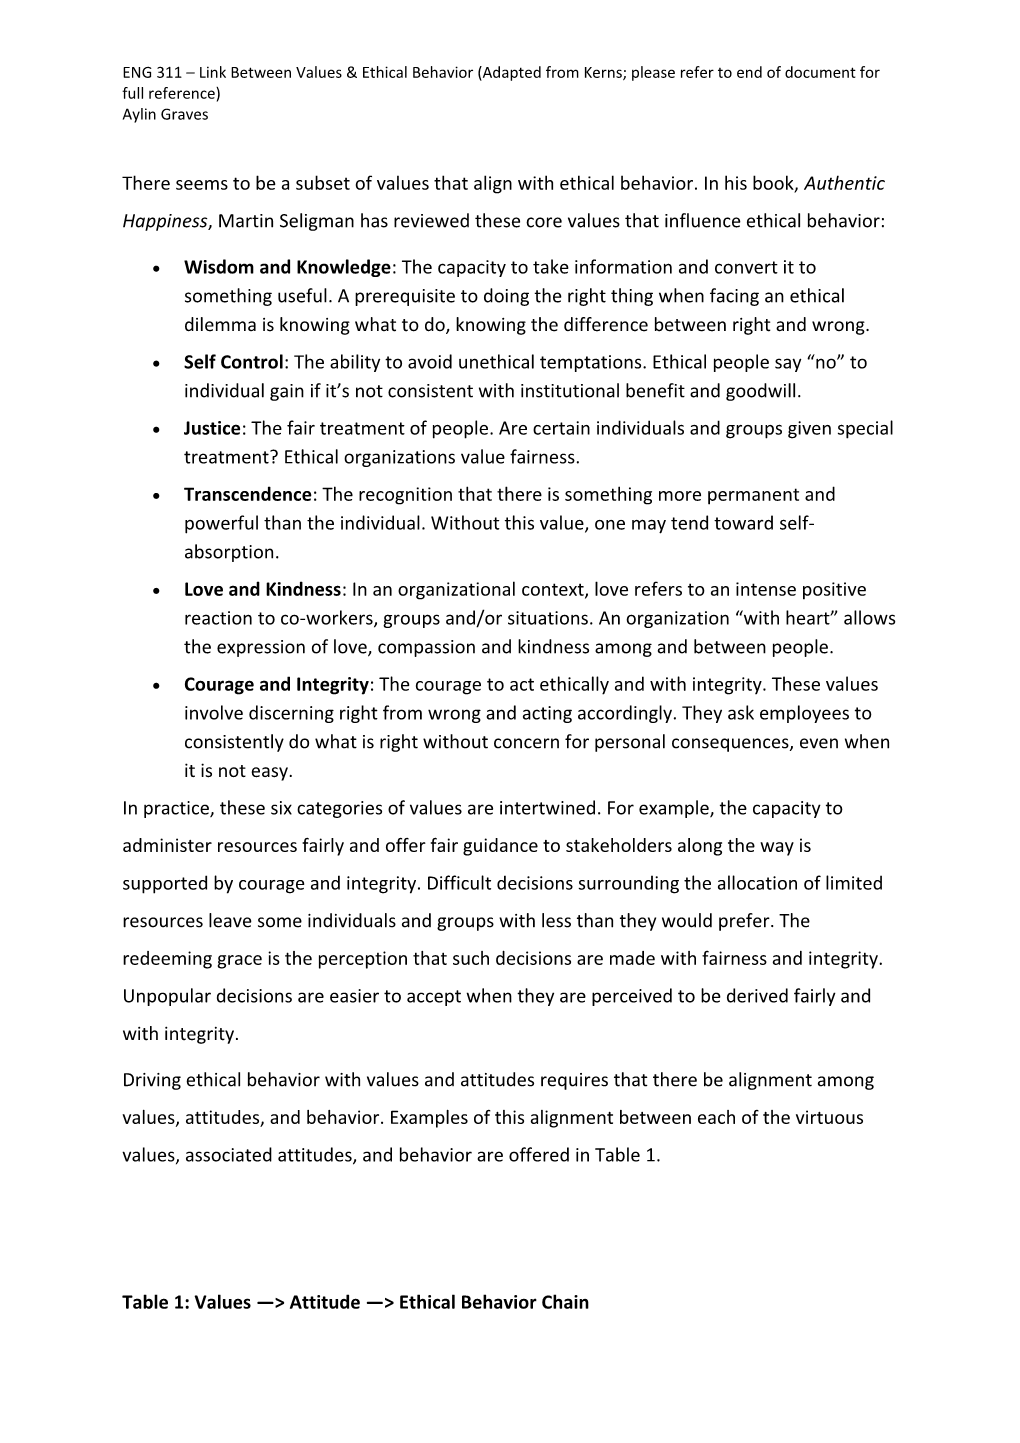 ENG 311 Link Between Values & Ethical Behavior (Adapted from Kerns; Please Refer to End